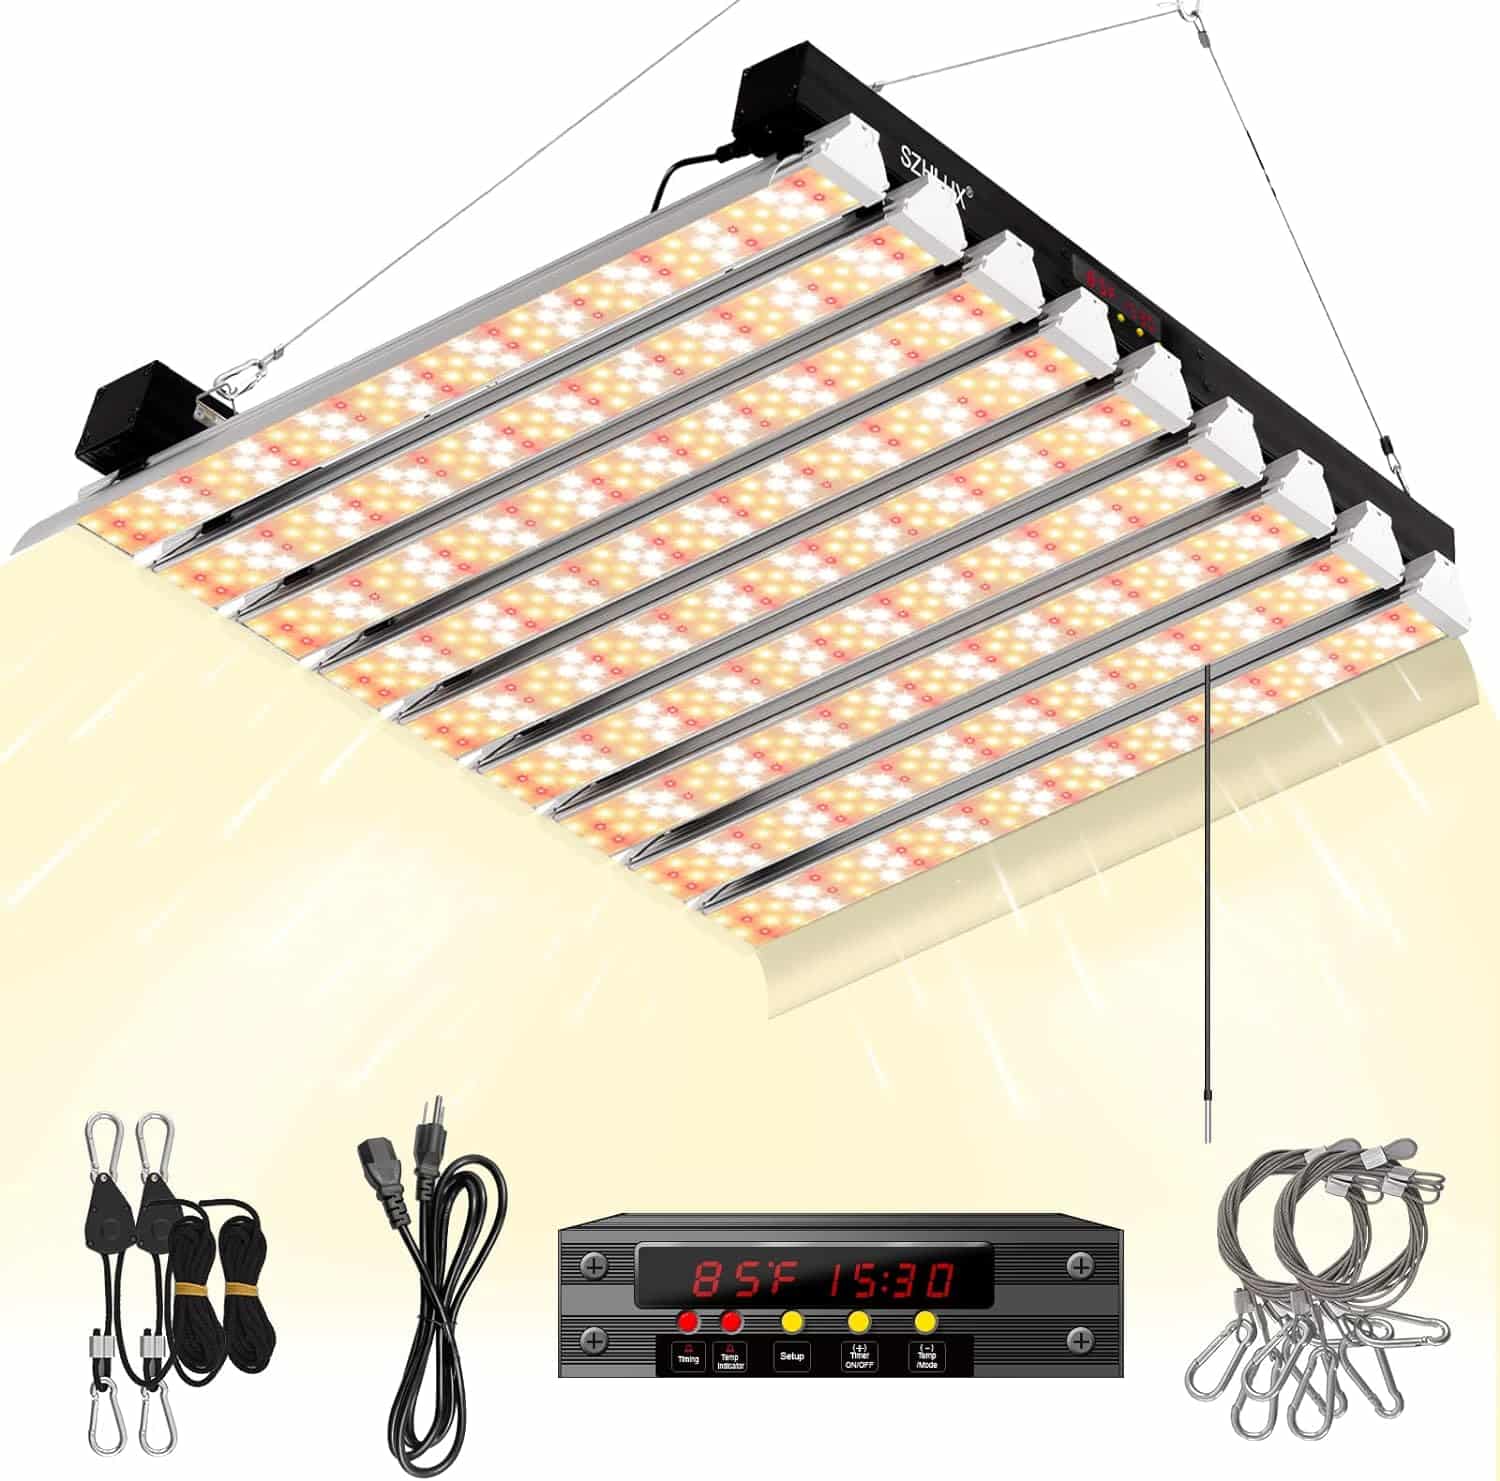 SZHLUX 600 Watt LED Grow Light 4×6ft with Timer and Temp Control, Full Spectrum Grow Lamp with 1728 Diodes for Indoor Plants, Sunlight Plant Light for Seedling Veg and Bloom